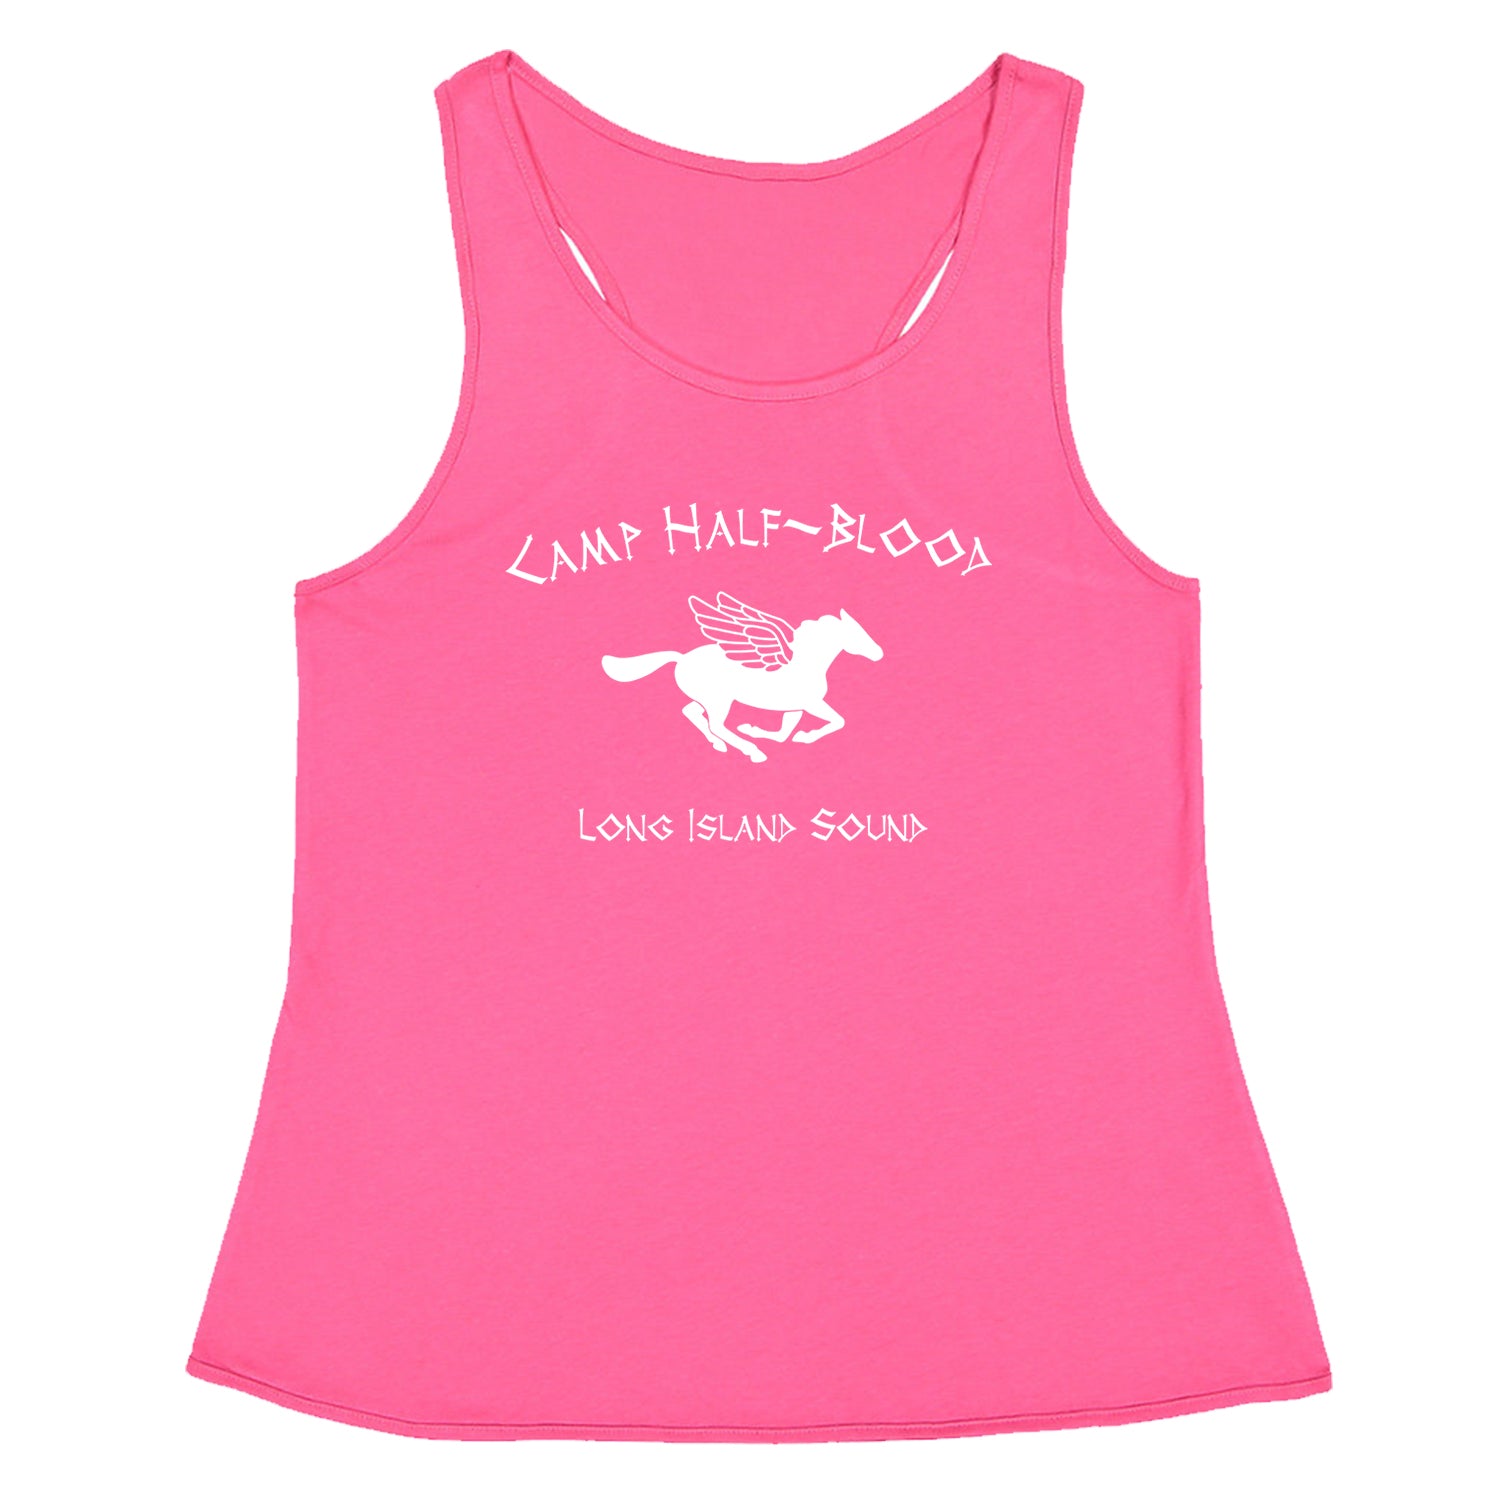 Camp Half Blood Long Island Sound Racerback Tank Top for Women and, apollo, blood, camp, half, jackson, jupiter, olympians, percy, the by Expression Tees